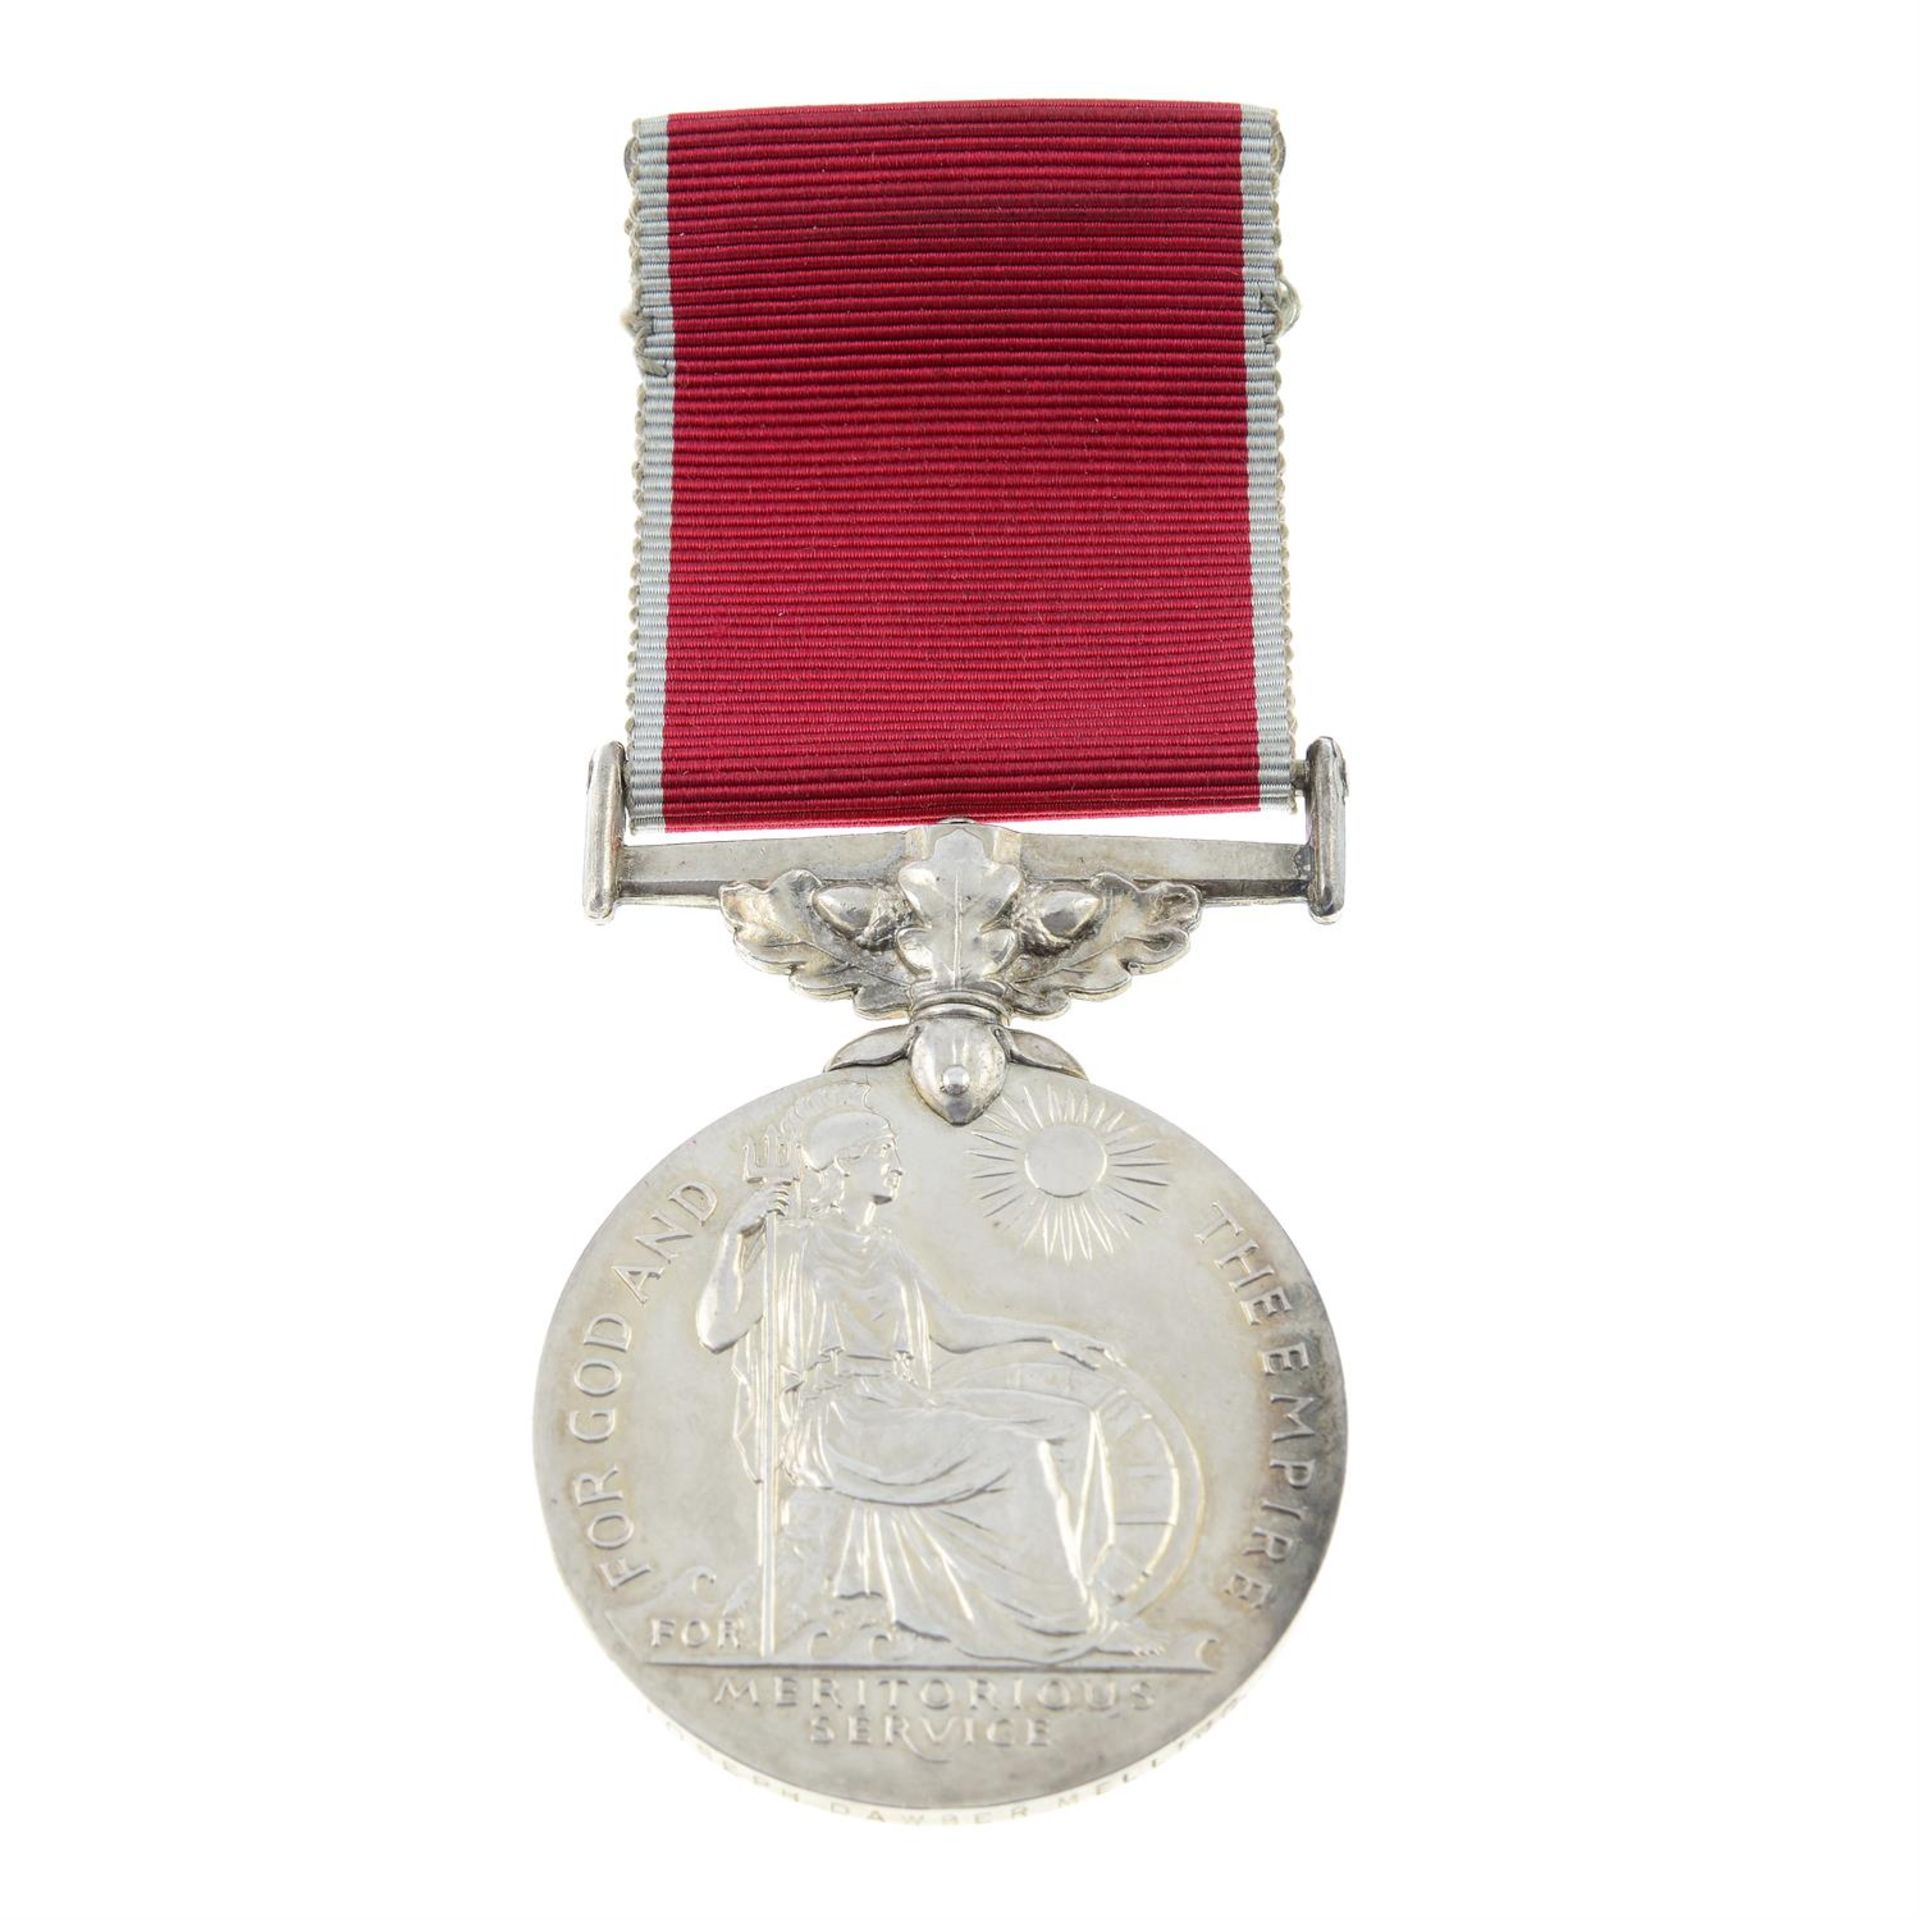 British Empire Medal, together with a General Service Medal 1918-62. (2).